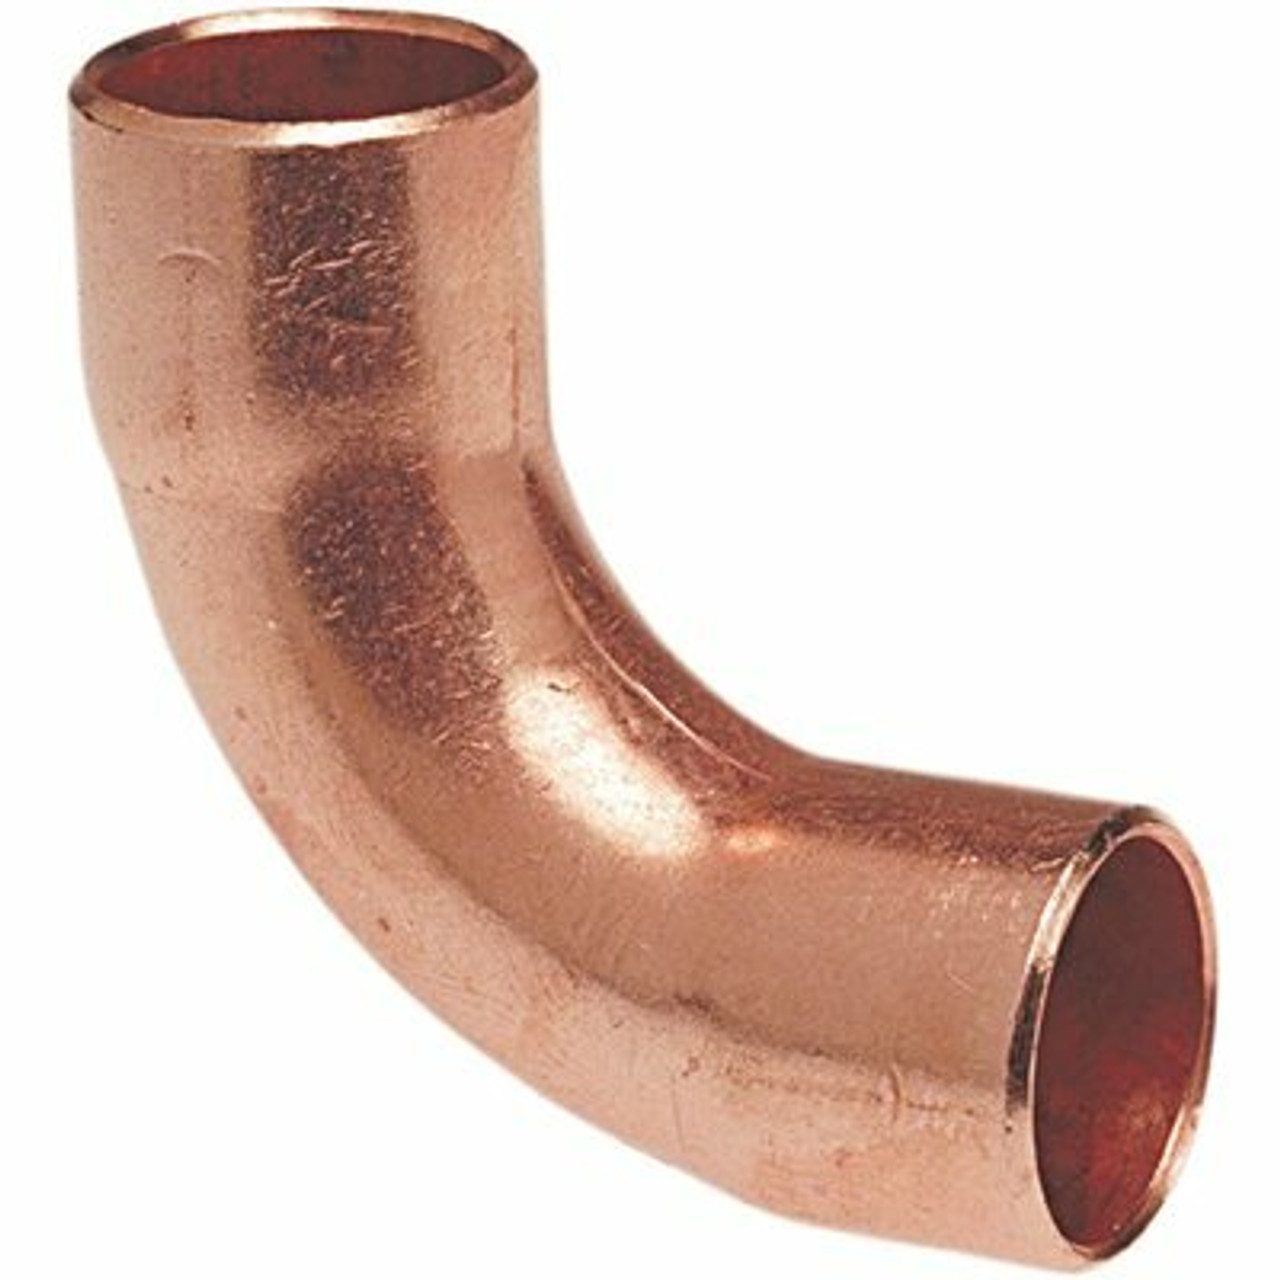 Nibco 1/4 In. Wrot Copper 90-Degree C X C Long Radius Elbow (25-Pack)